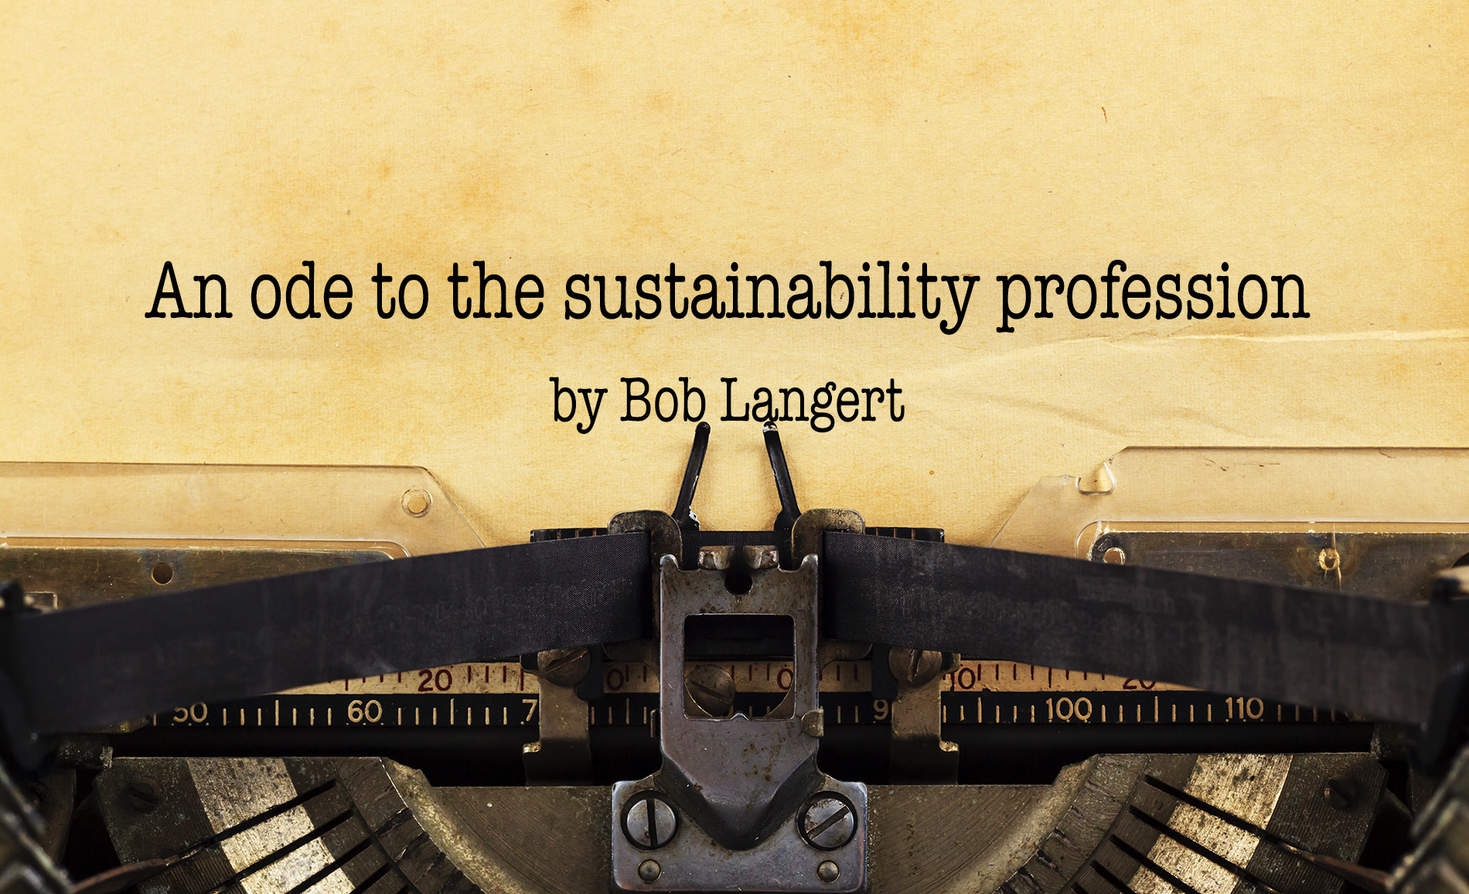 An ode to the sustainability profession